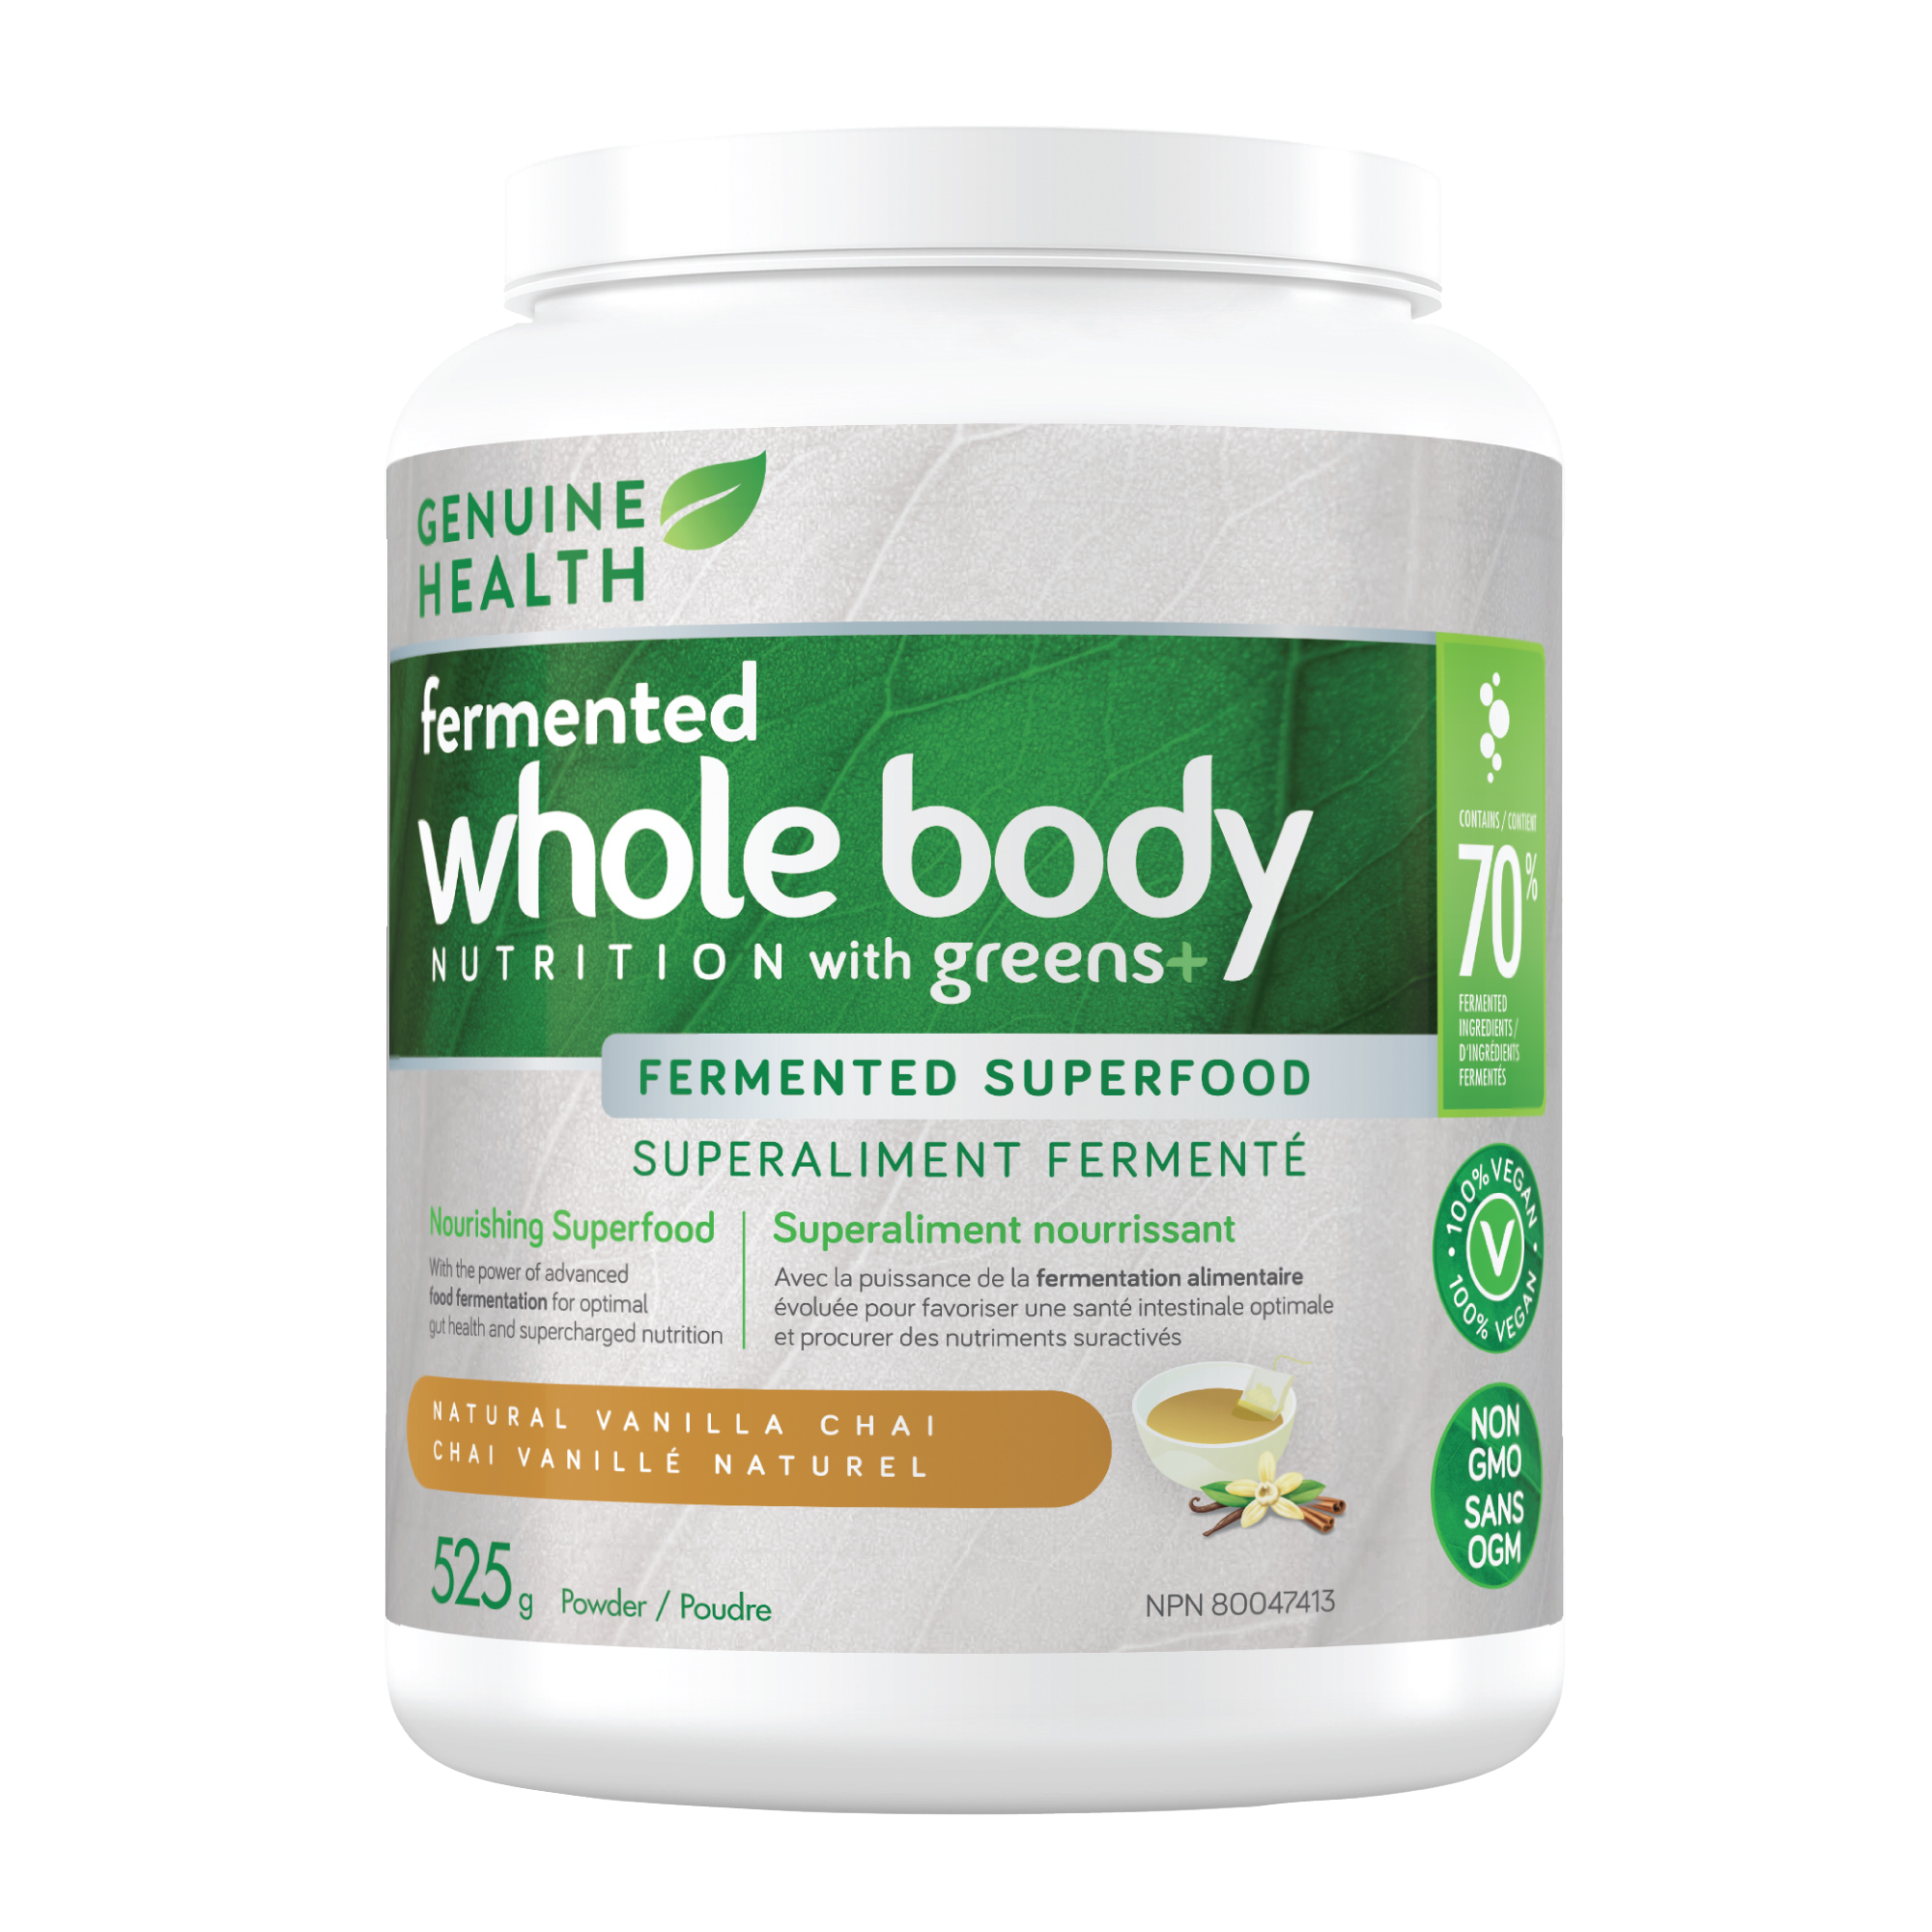 Genuine Health fermented whole body NUTRITION with greens+ vanilla chai (525 g)